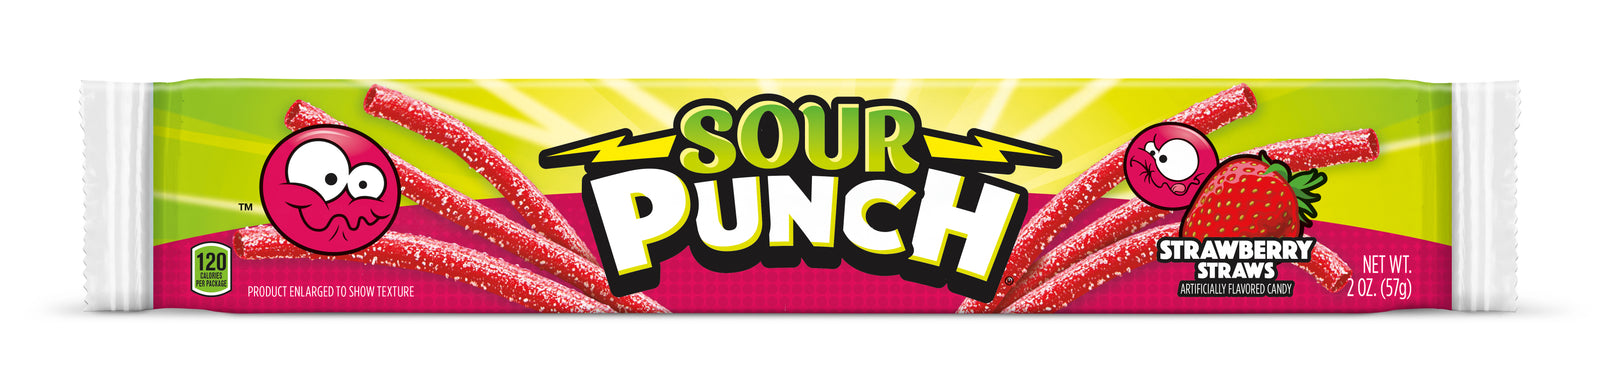 Sour Punch Strawberry Straws - 24 ct